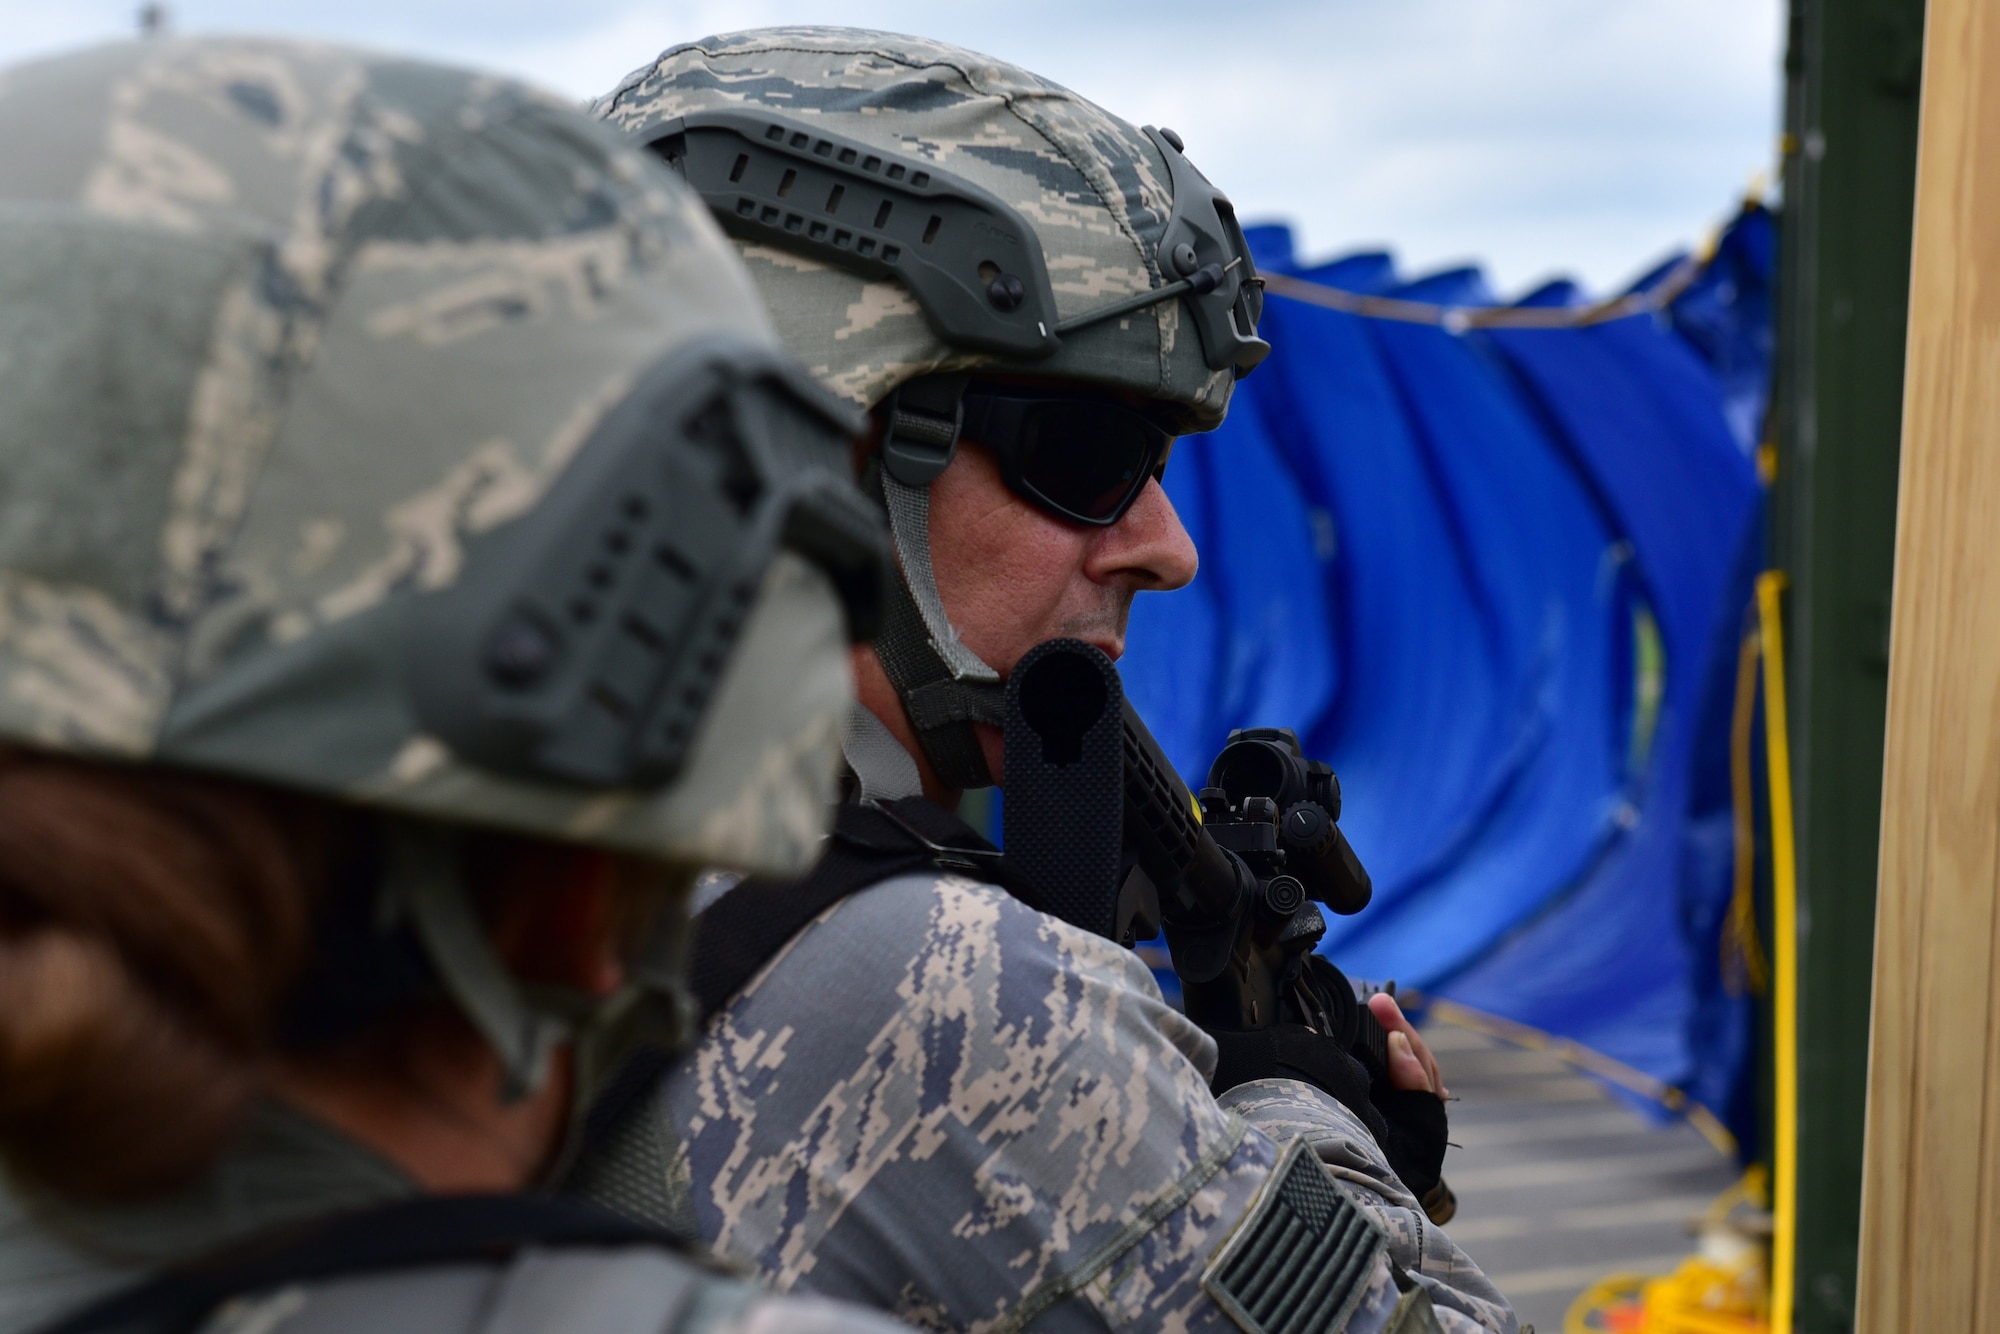 A member of the 914th Security Forces Squadron prepares to enter a simulated building during a training exercise Wednesday, July 13, 2017, Niagara Falls Air Reserve Station, N.Y.The exercise is part of a "shoot-move-communicate" annual training to test SFS members' readiness. (U.S. Air Force photo by Staff Sgt. Richard Mekkri)